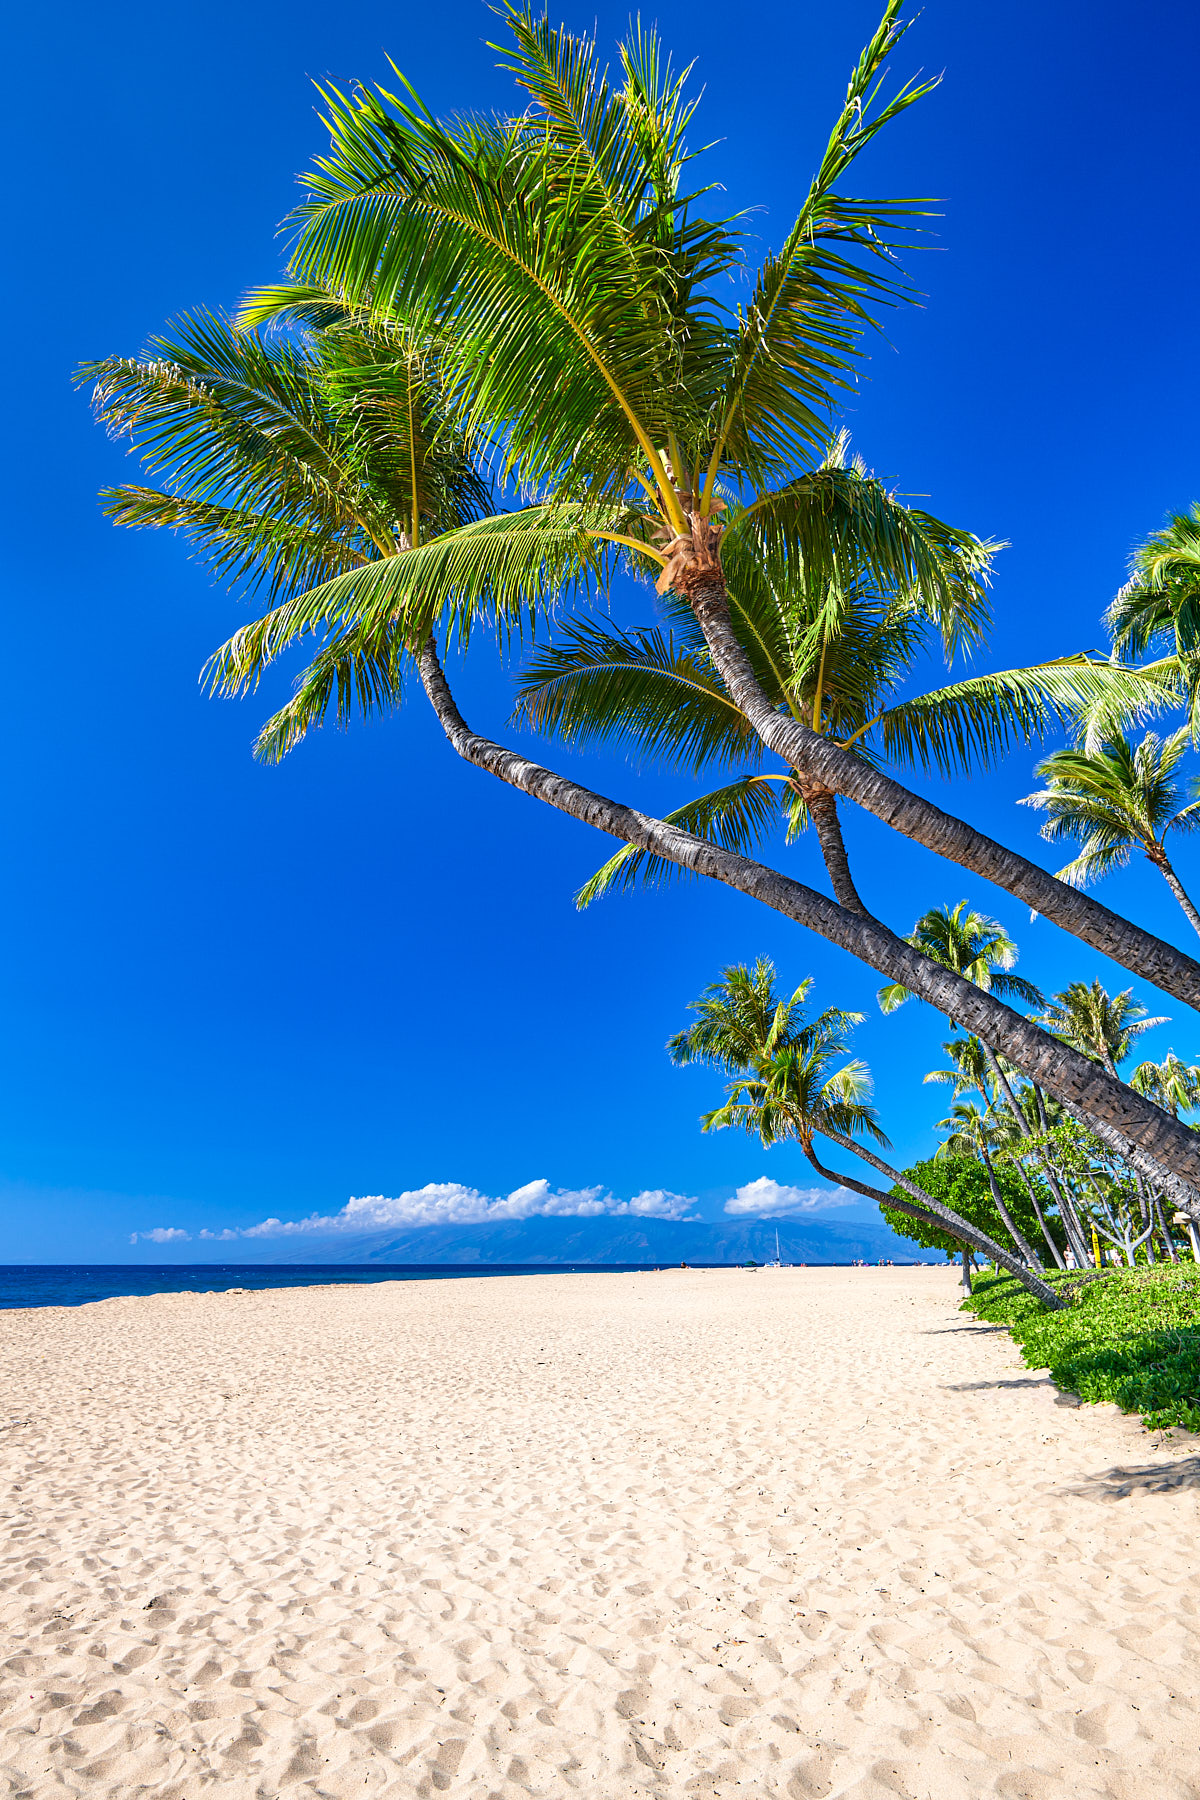 a perfect day on Ka'anapali Beach on the island of Maui with coconut palms and white sand.  This image was also featured on the cover of Maui No Ka Oi Magazine